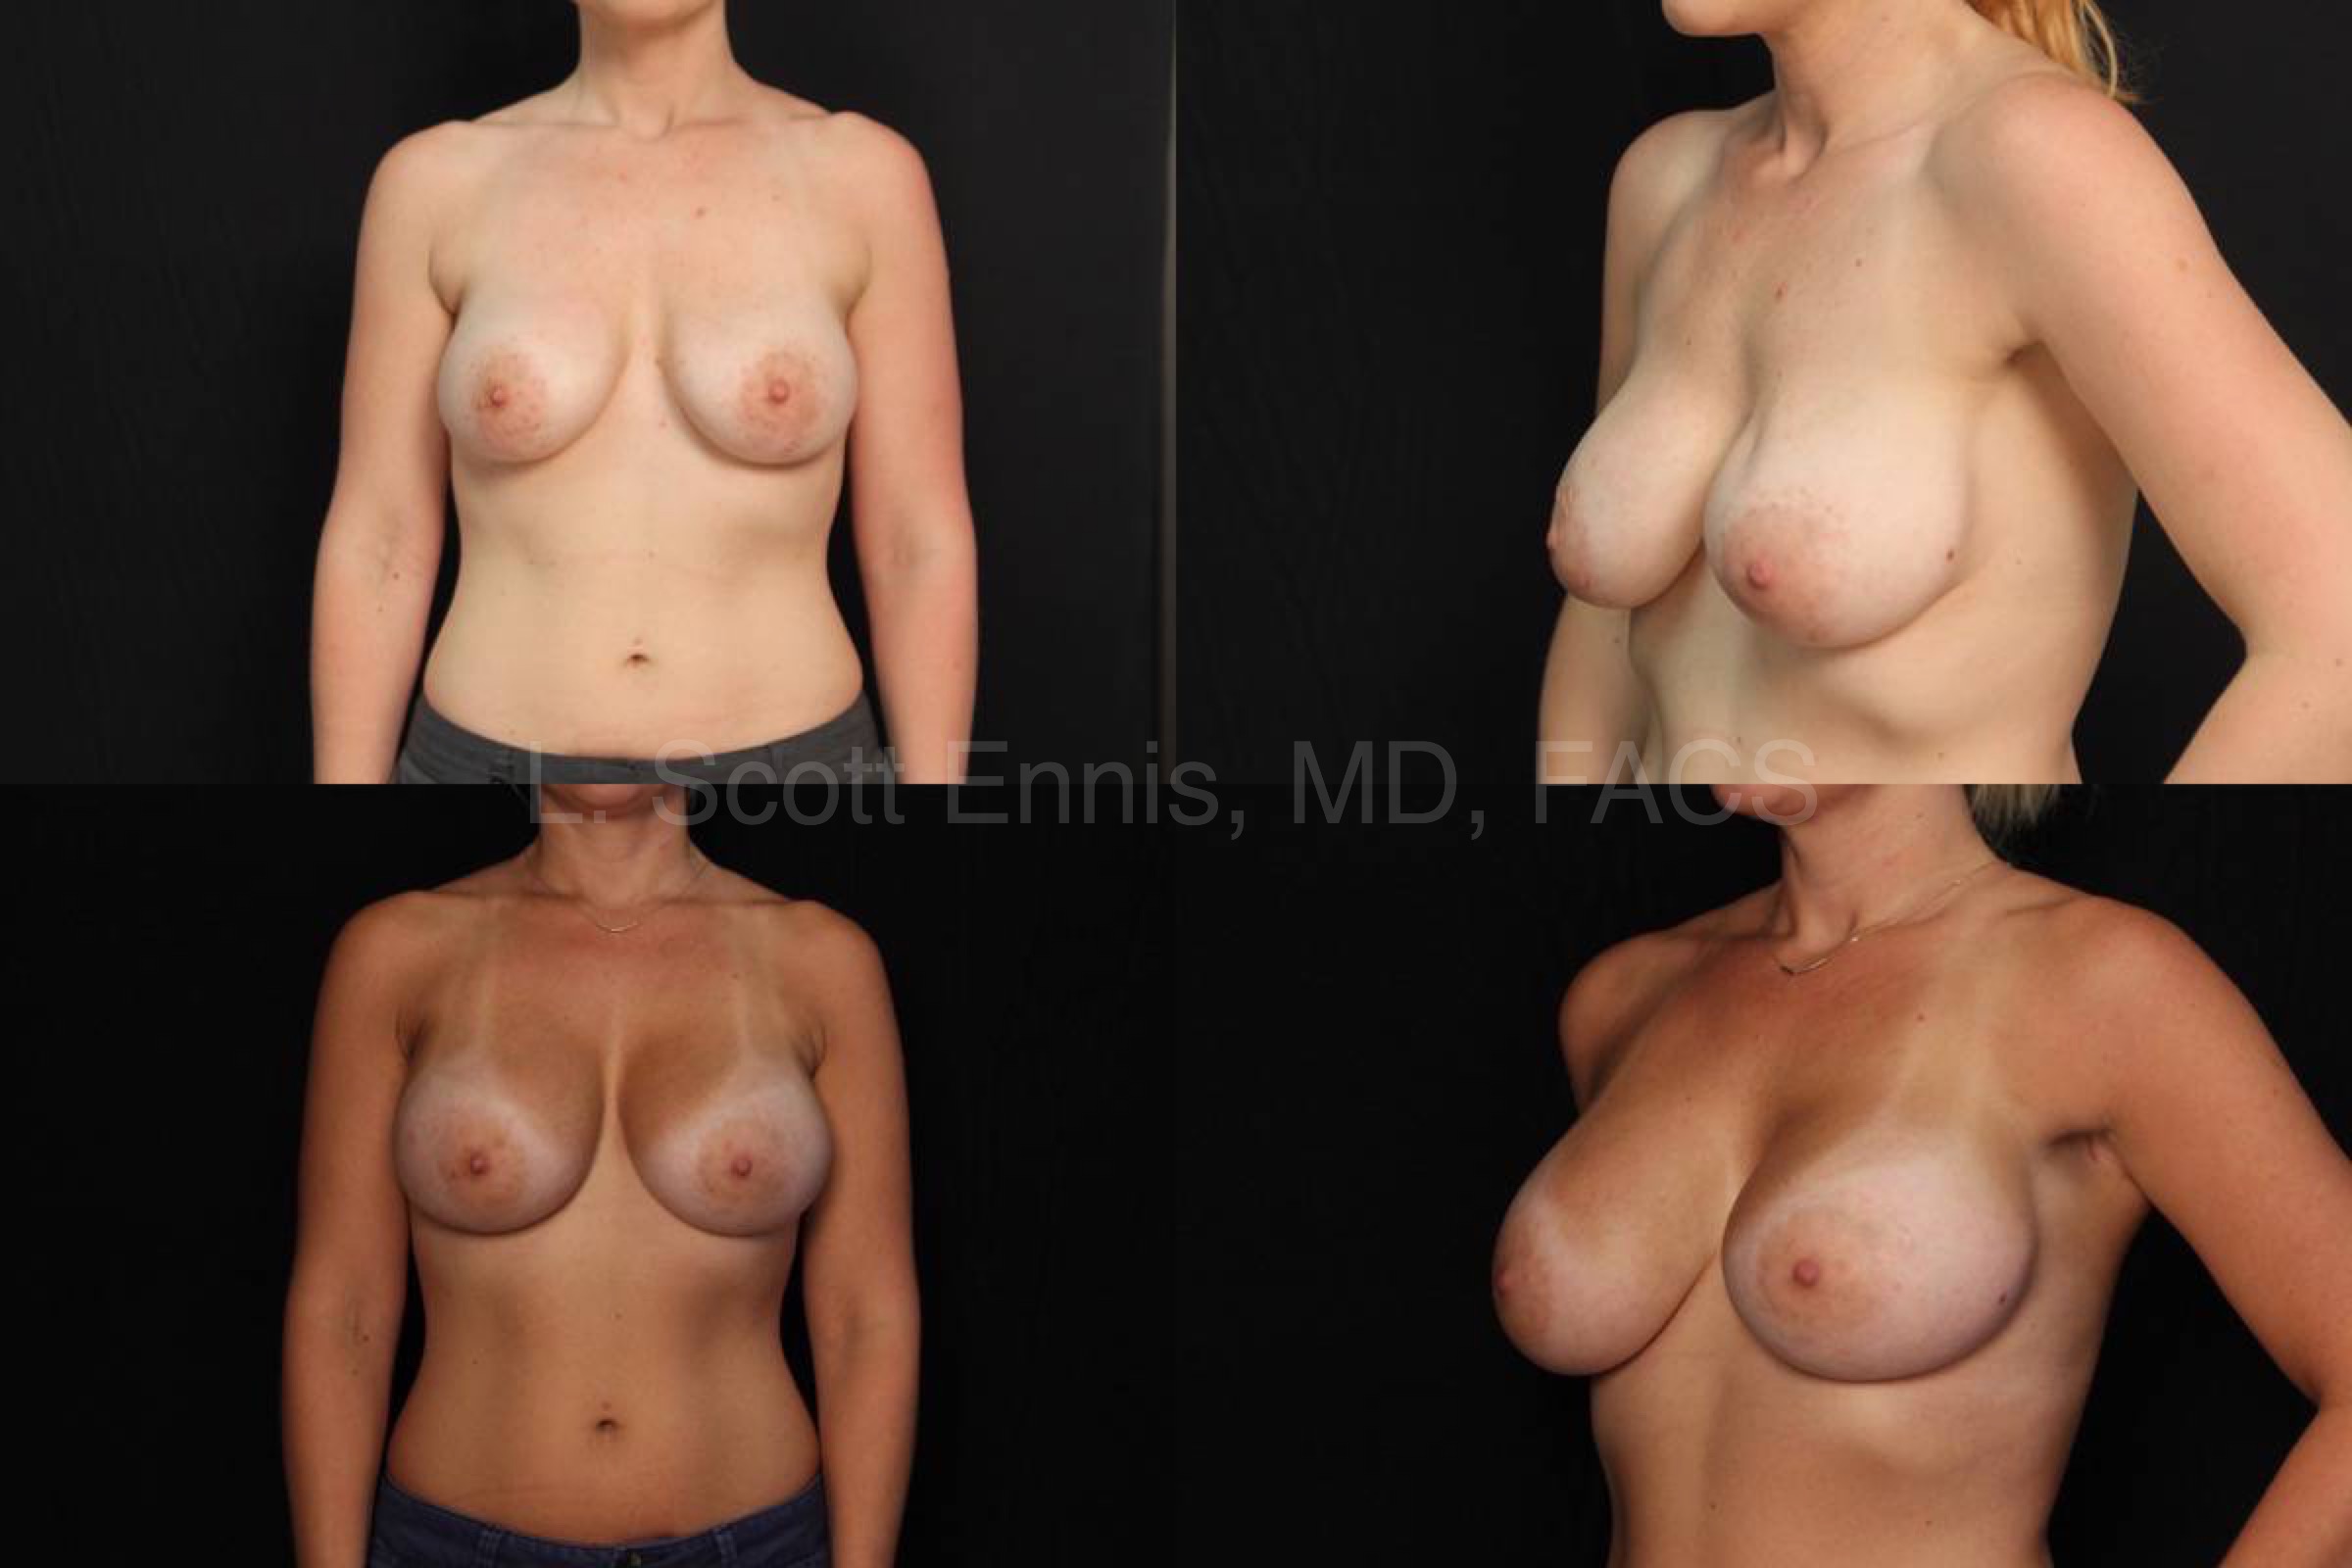 Breast Implant Exchange Bilateral from Saline to Silicone to improve rippling L600 R650 Before and After Ennis Plastic Surgery Palm Beach Boca Raton Destin Miami Fort Lauderdale